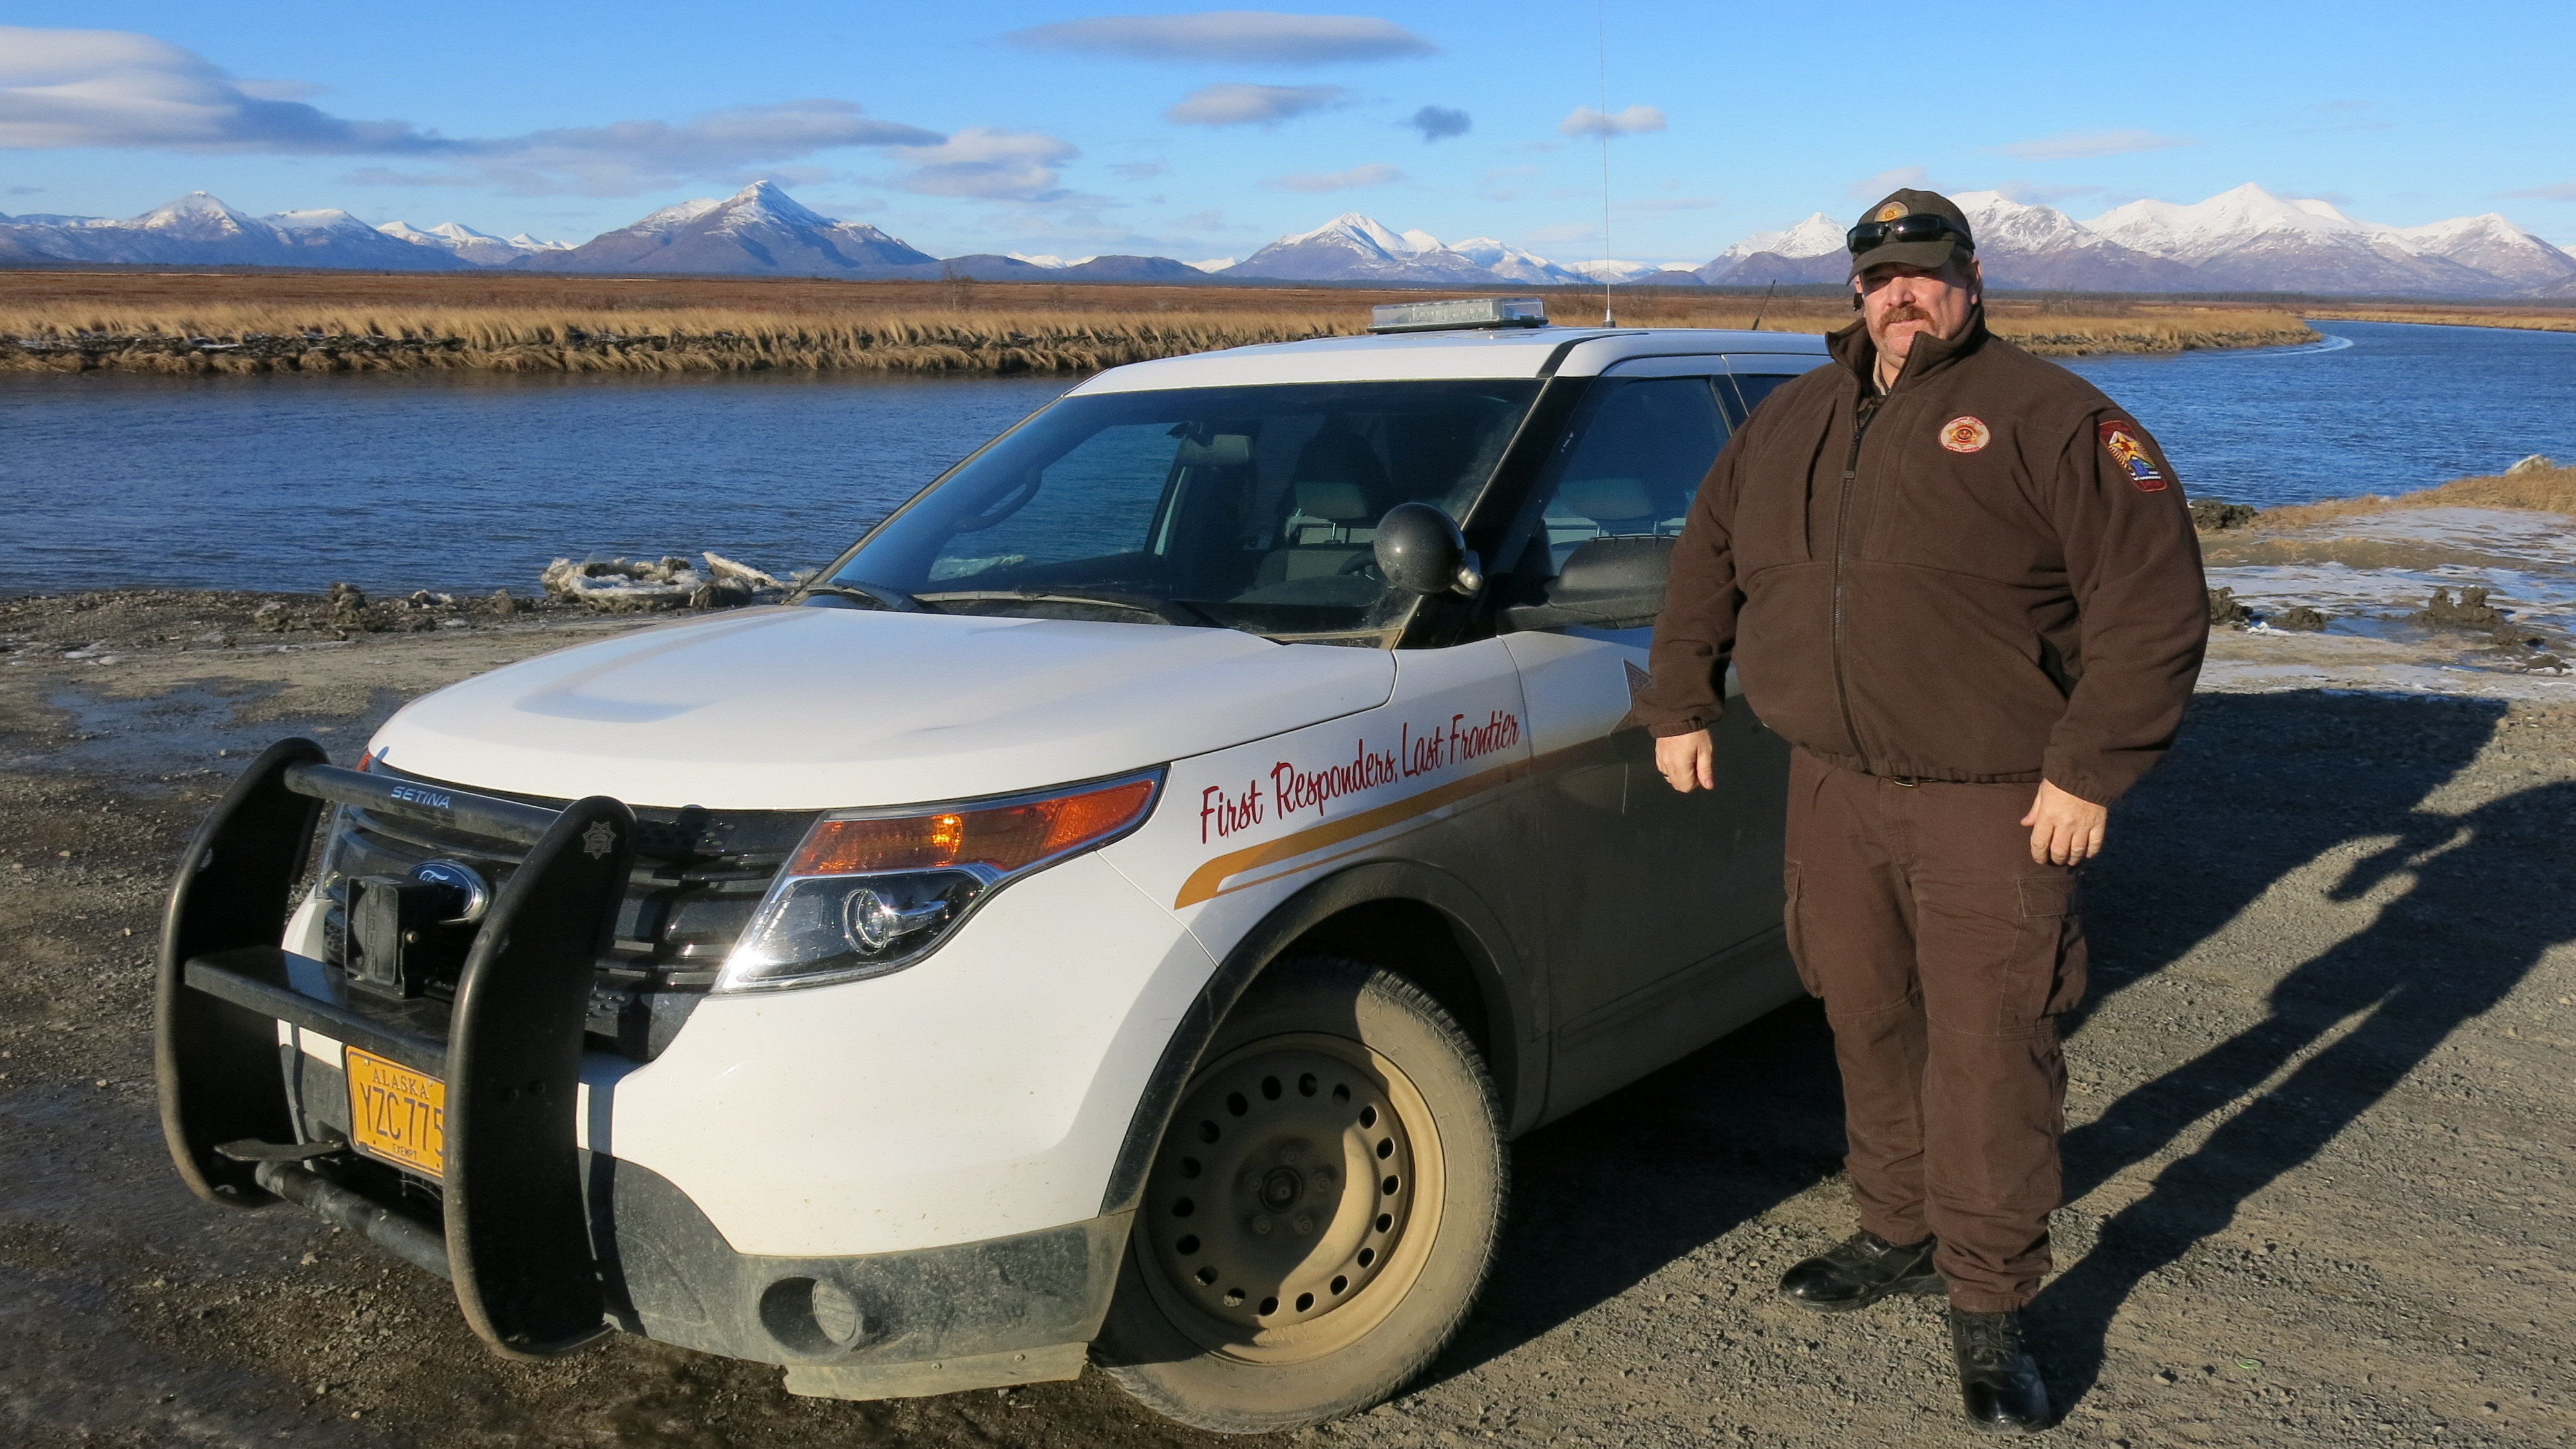 Mike Myers is the roving village public safety officer serving southwest Alaska villages including Manokotak. Like many officers in rural Alaska, Myers doesn't carry a gun and often doesn't need one